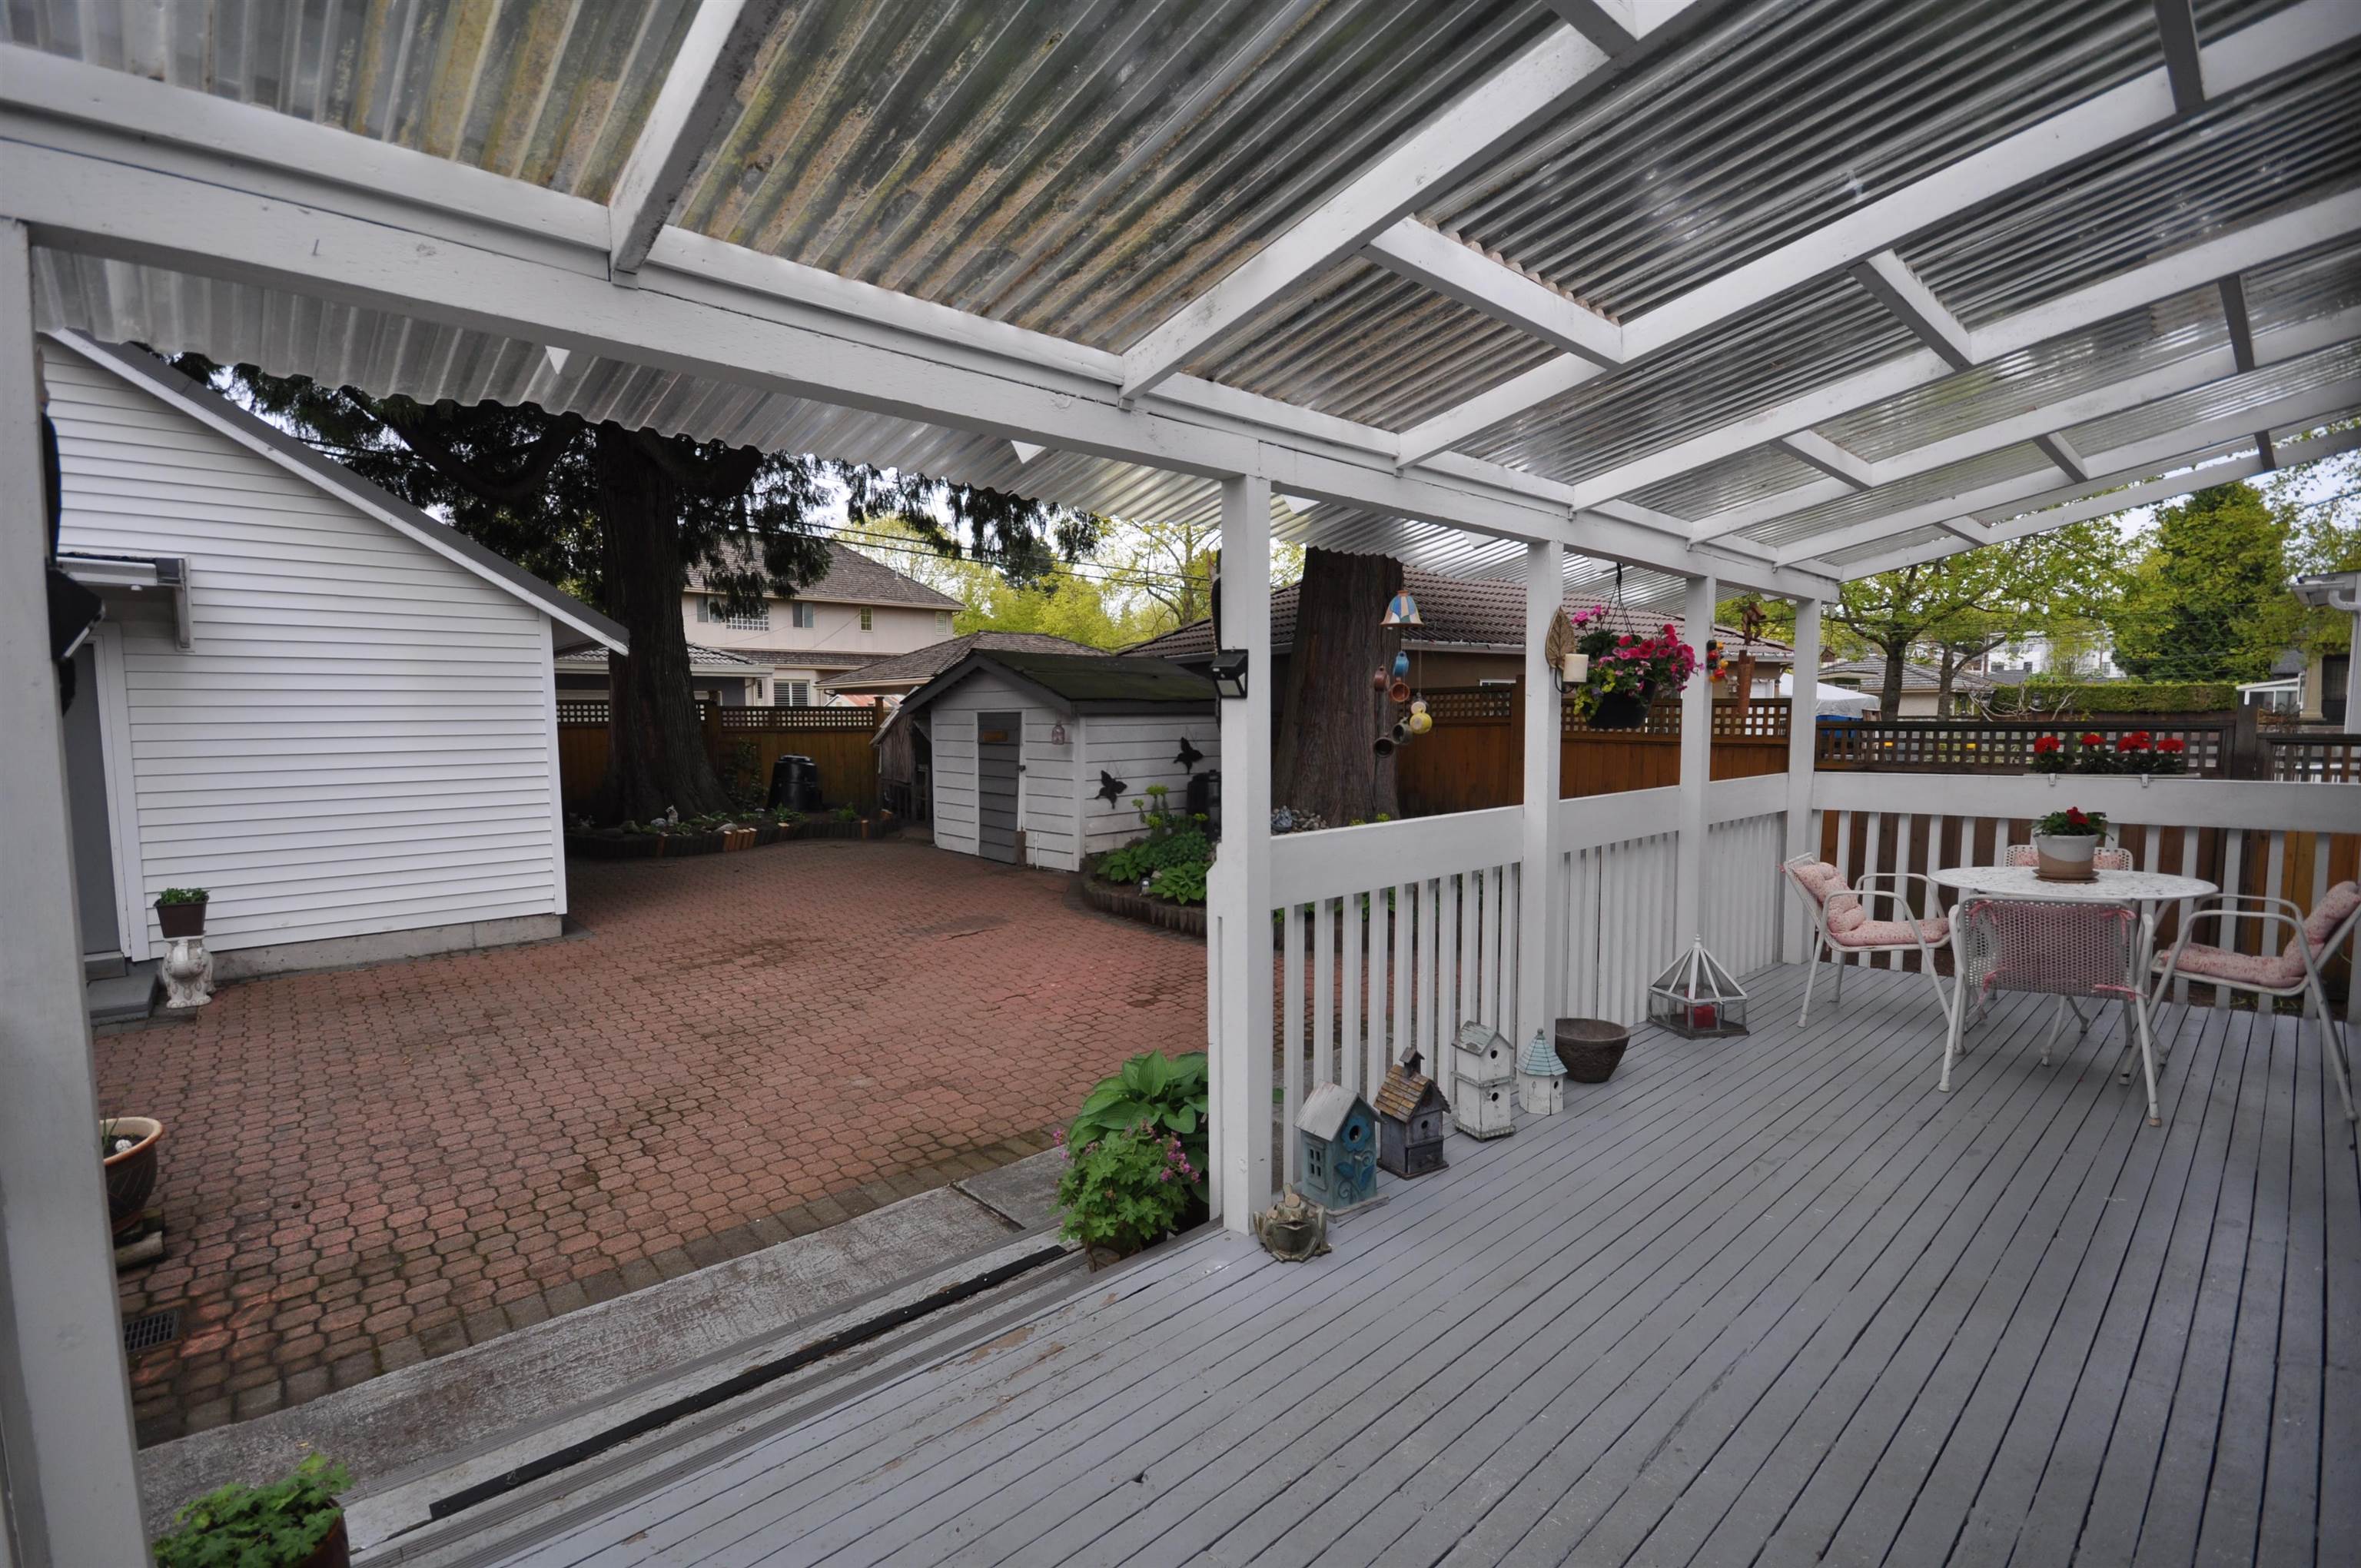 Listing image of 1613 W 61ST AVENUE